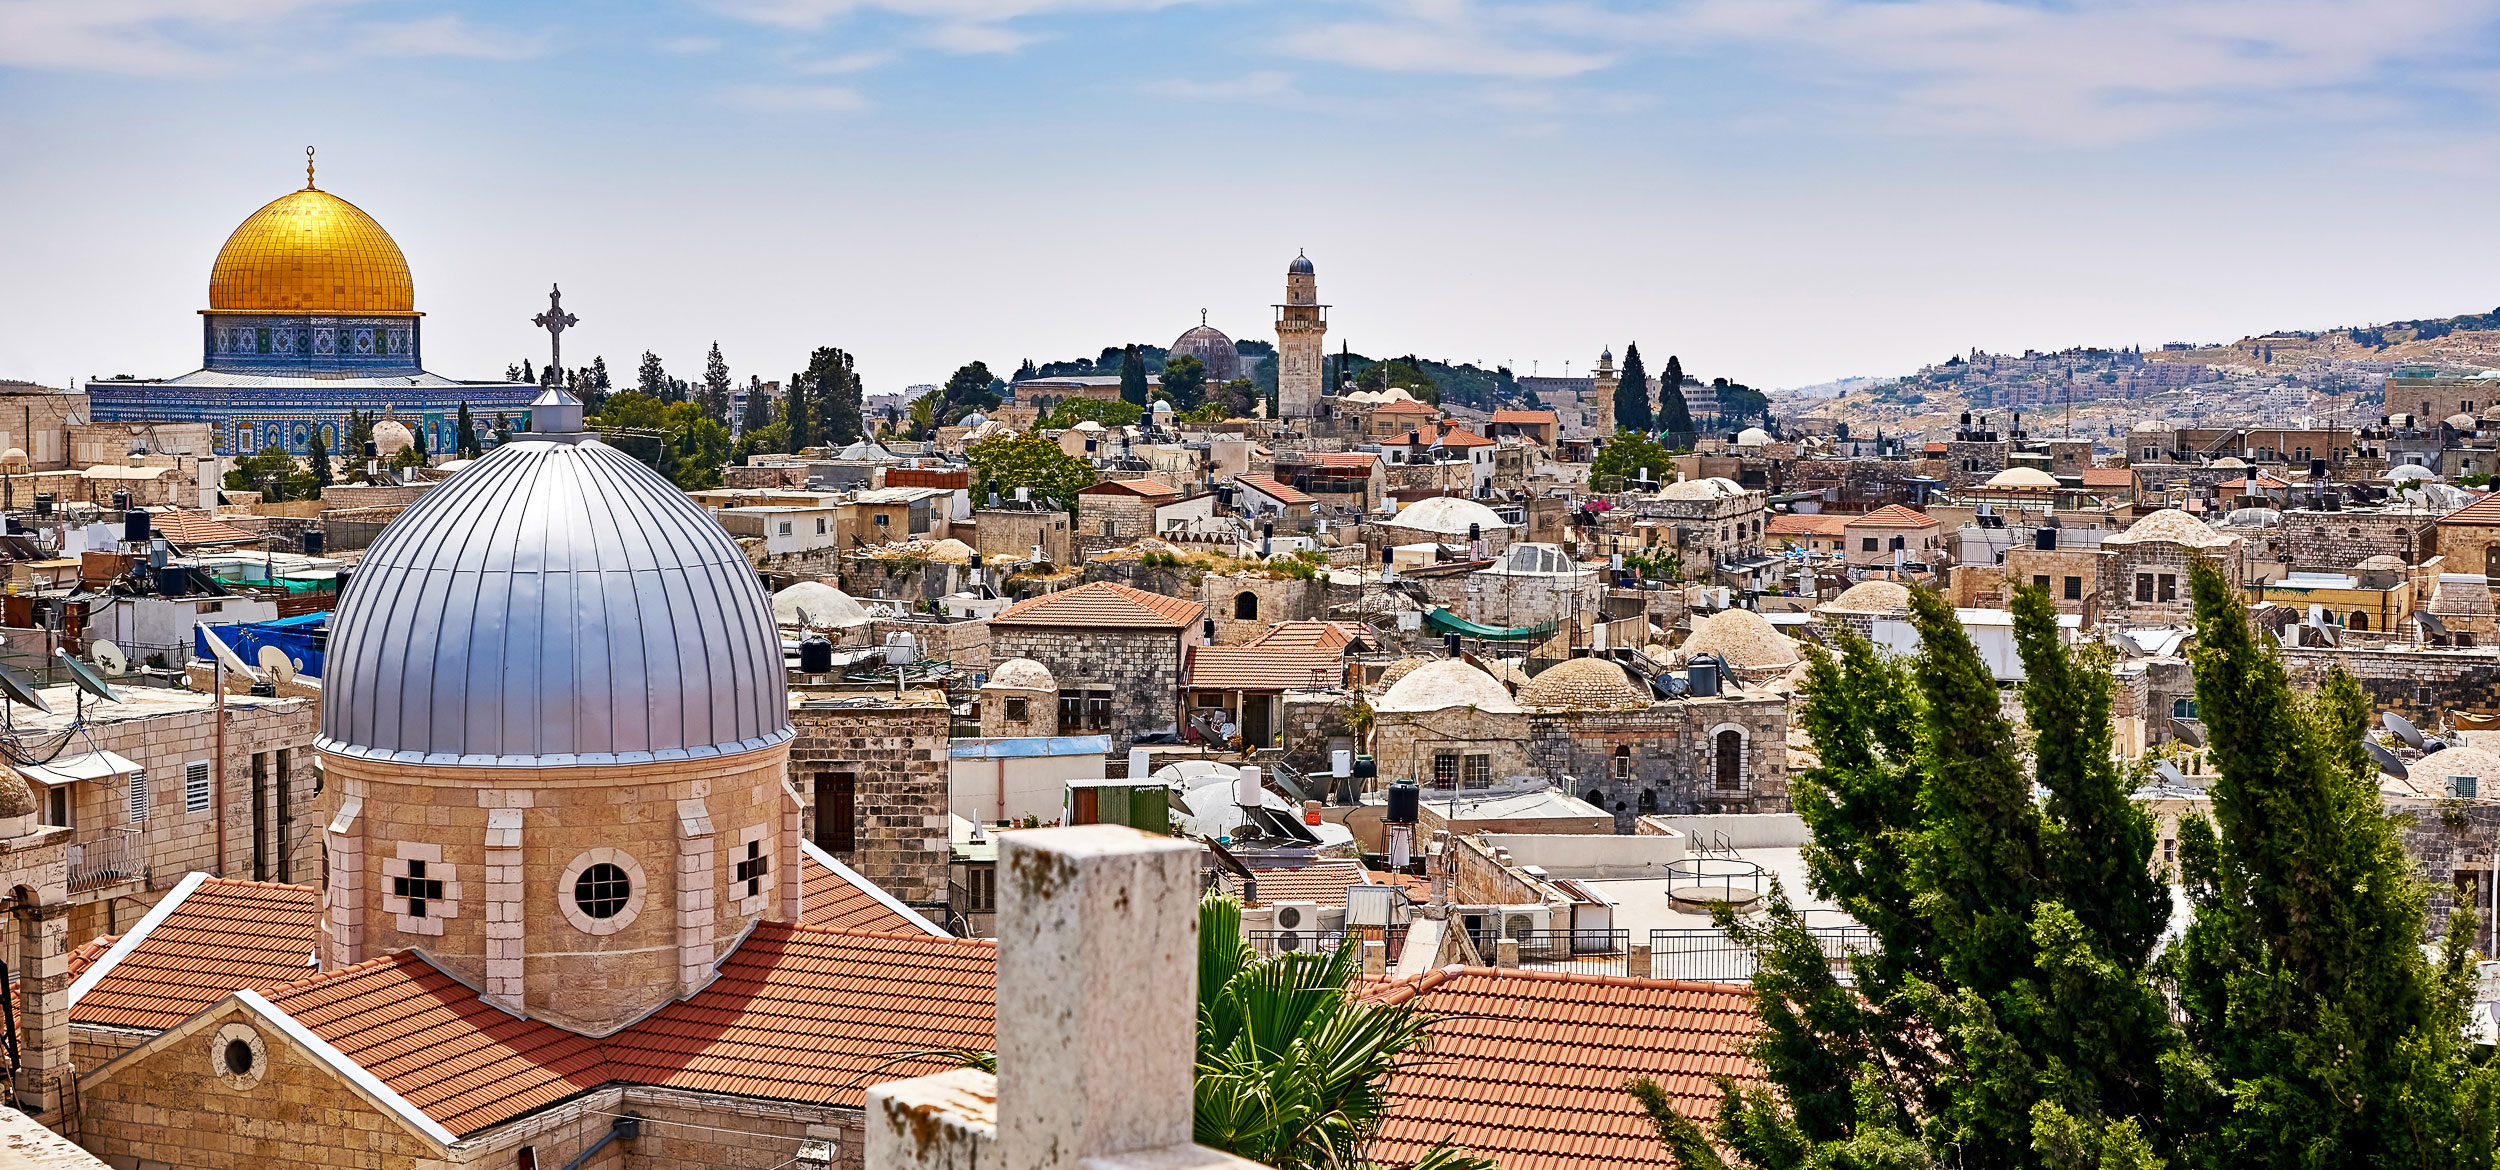 Aerial view of Jerusalem, Israel, with the golden Dome of the Rock on the Temple Mount in the background